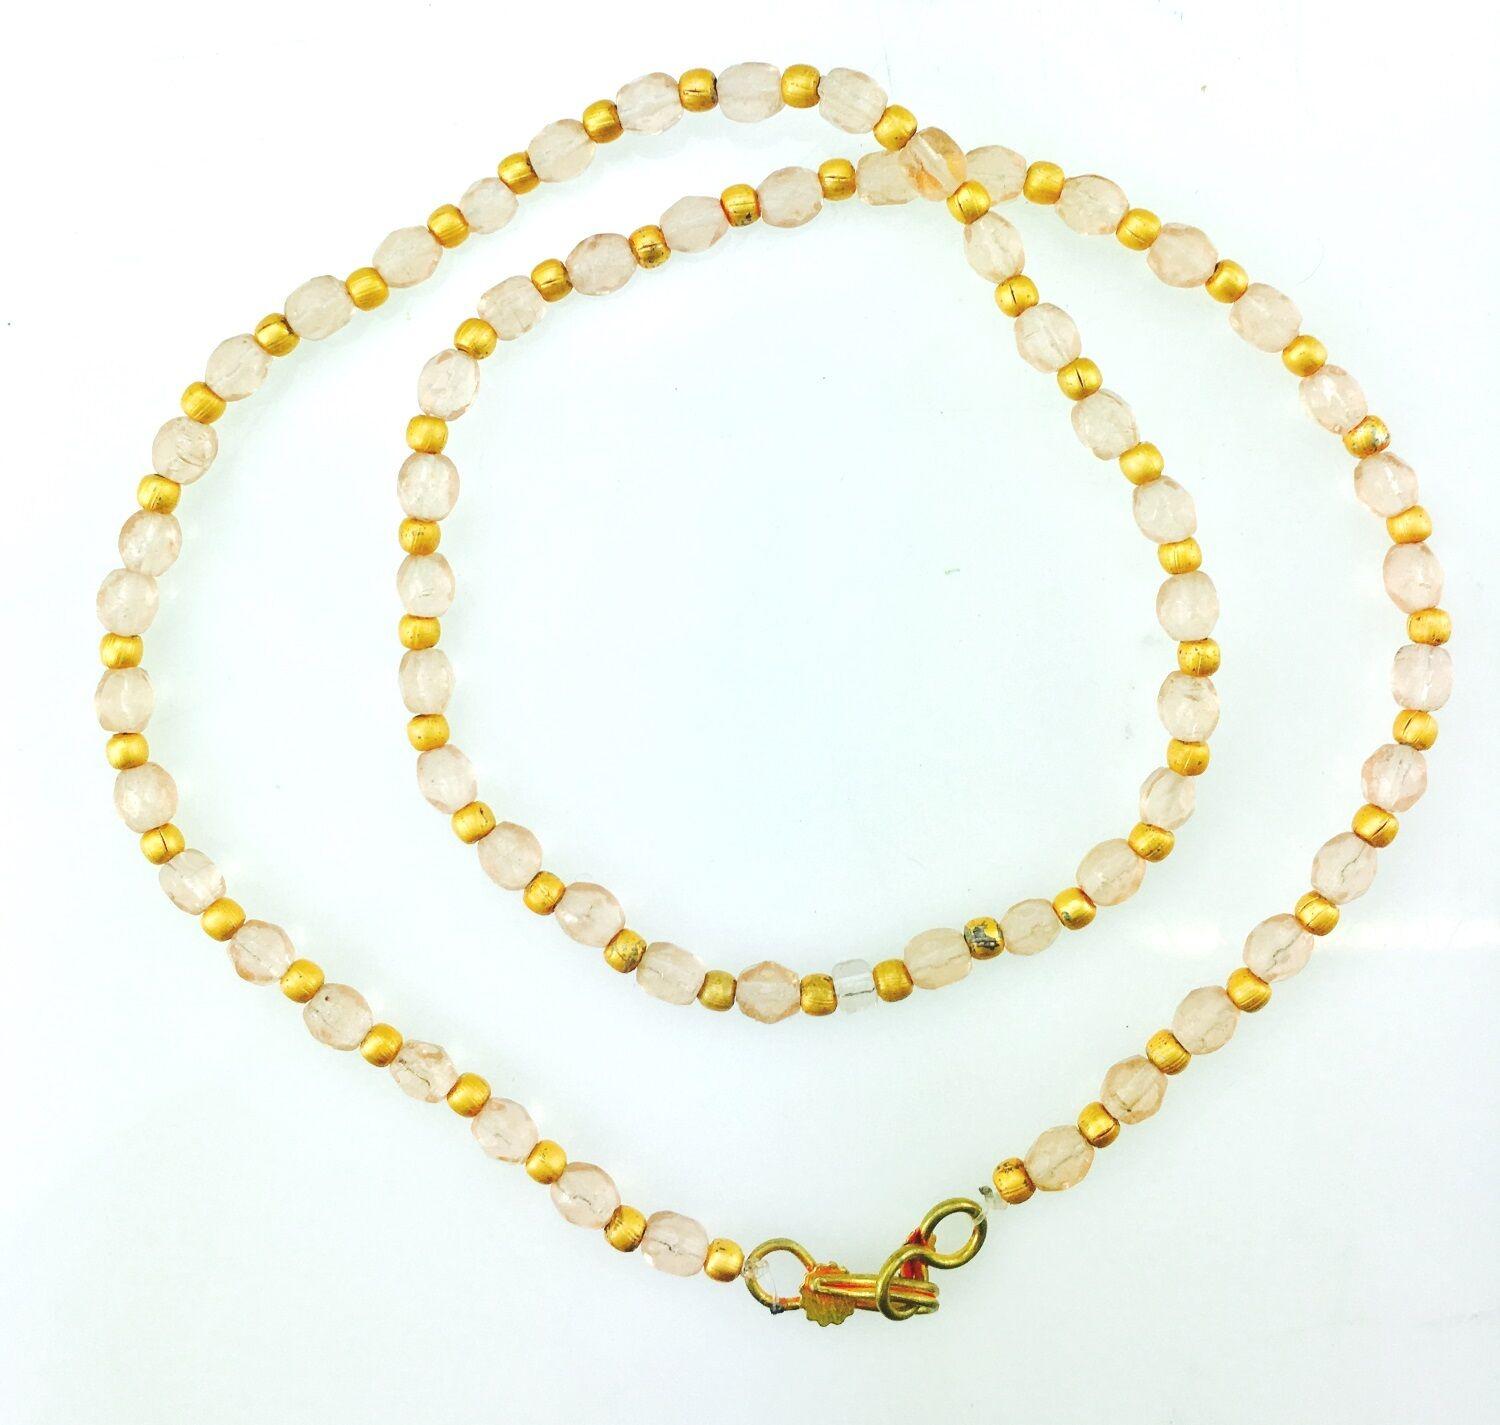 Mardi Gras Plastic Bead Necklaces for Birthday Favors and Decorations,  Metallic Gold, 24-Pack - Walmart.com